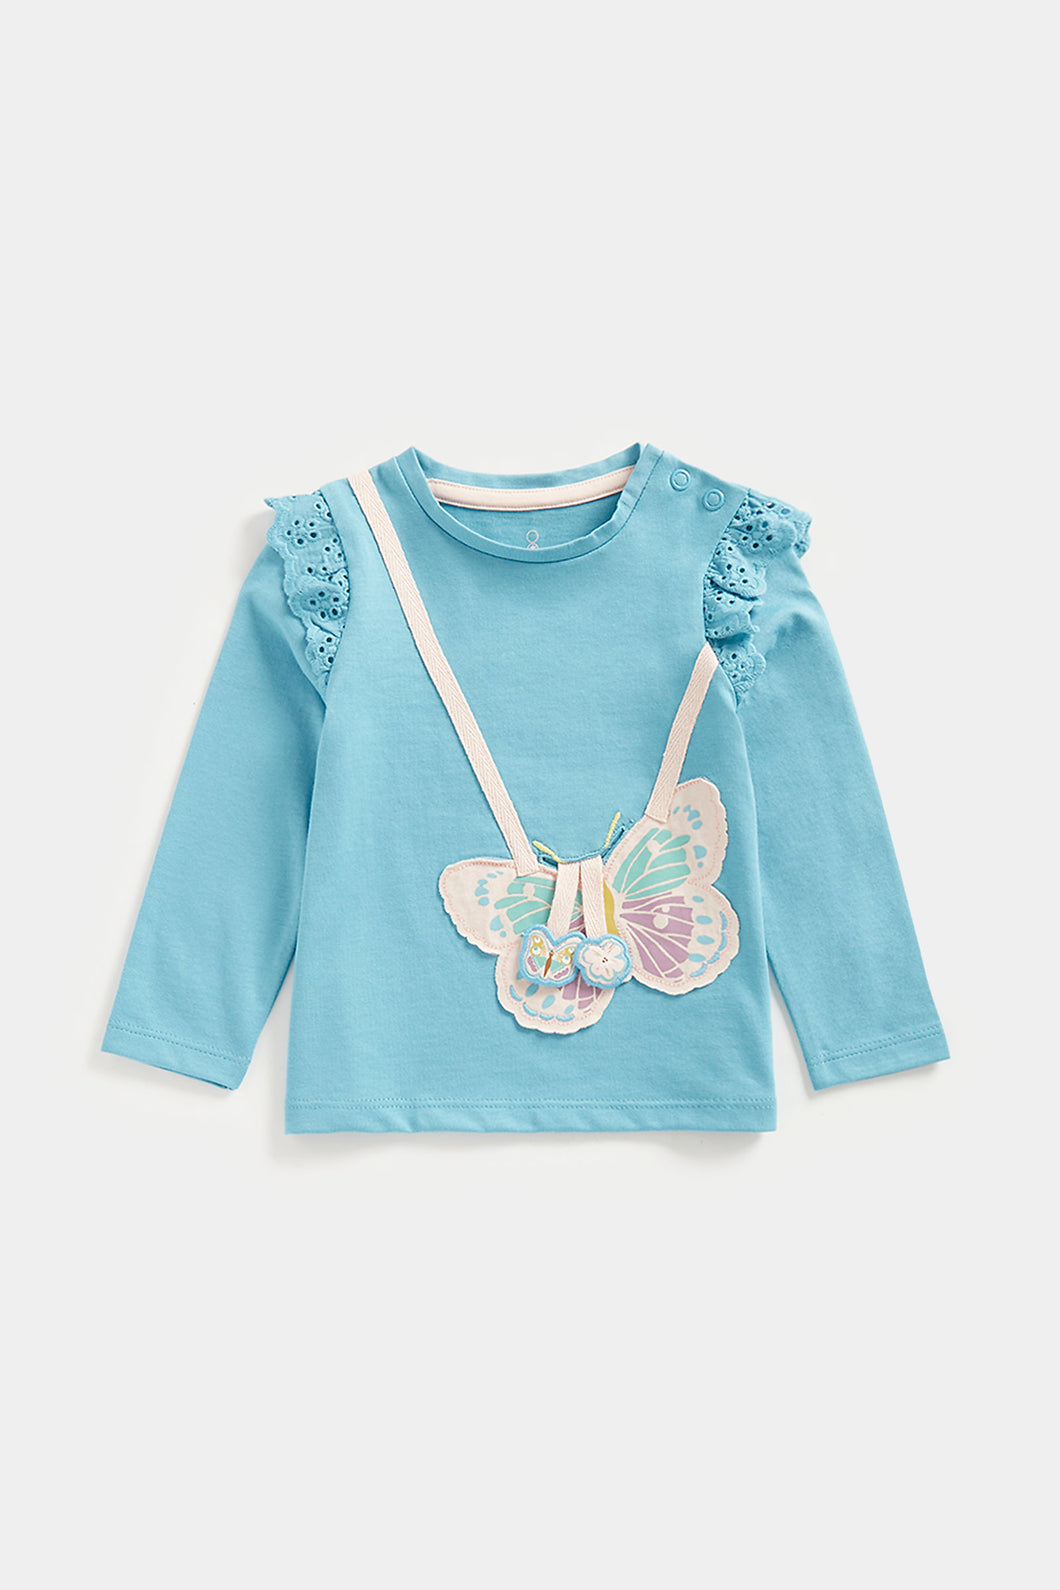 Mothercare Butterfly Bag Long-Sleeved T-Shirt